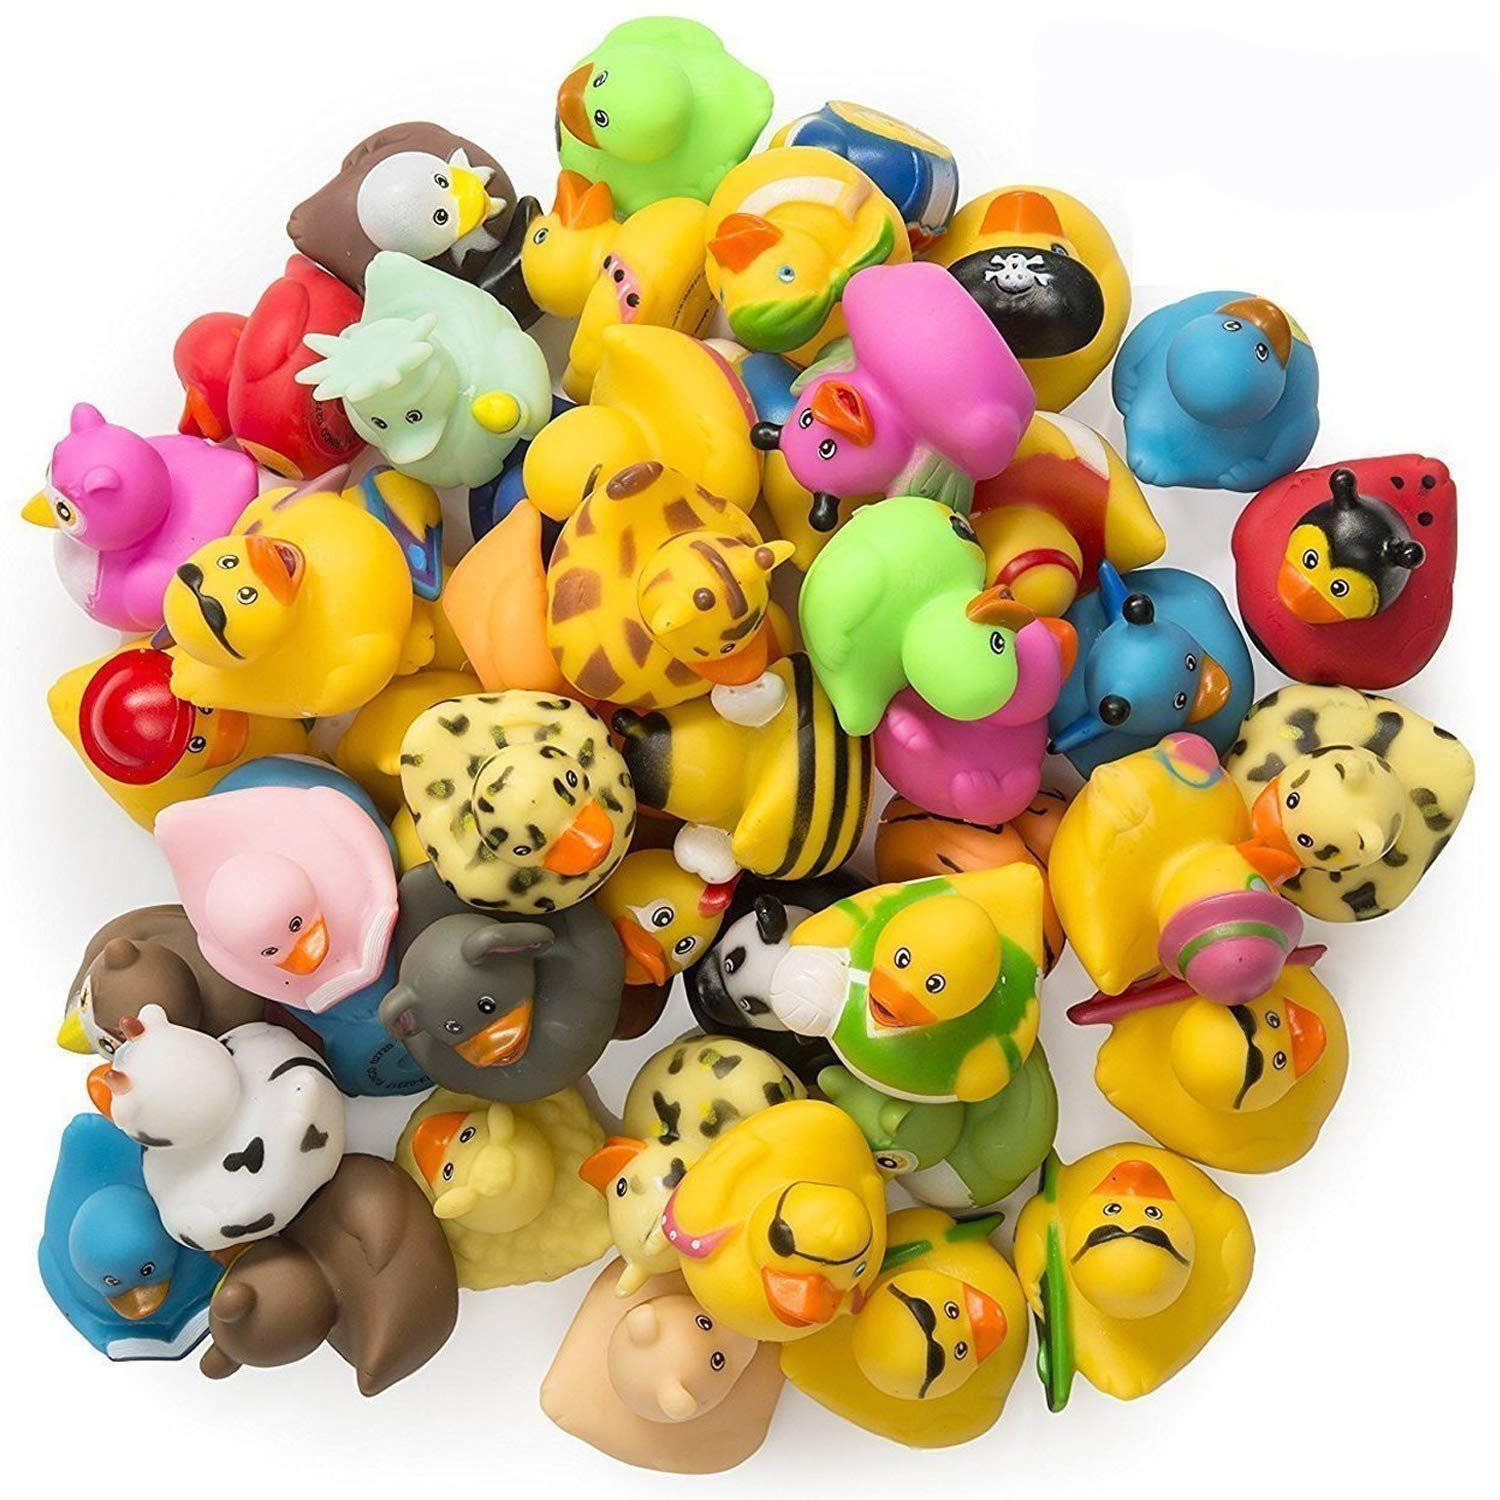 Party City Rubber Duck Baby Shower
 ASSORTED RUBBER DUCKIES 100PC bath floater – baby